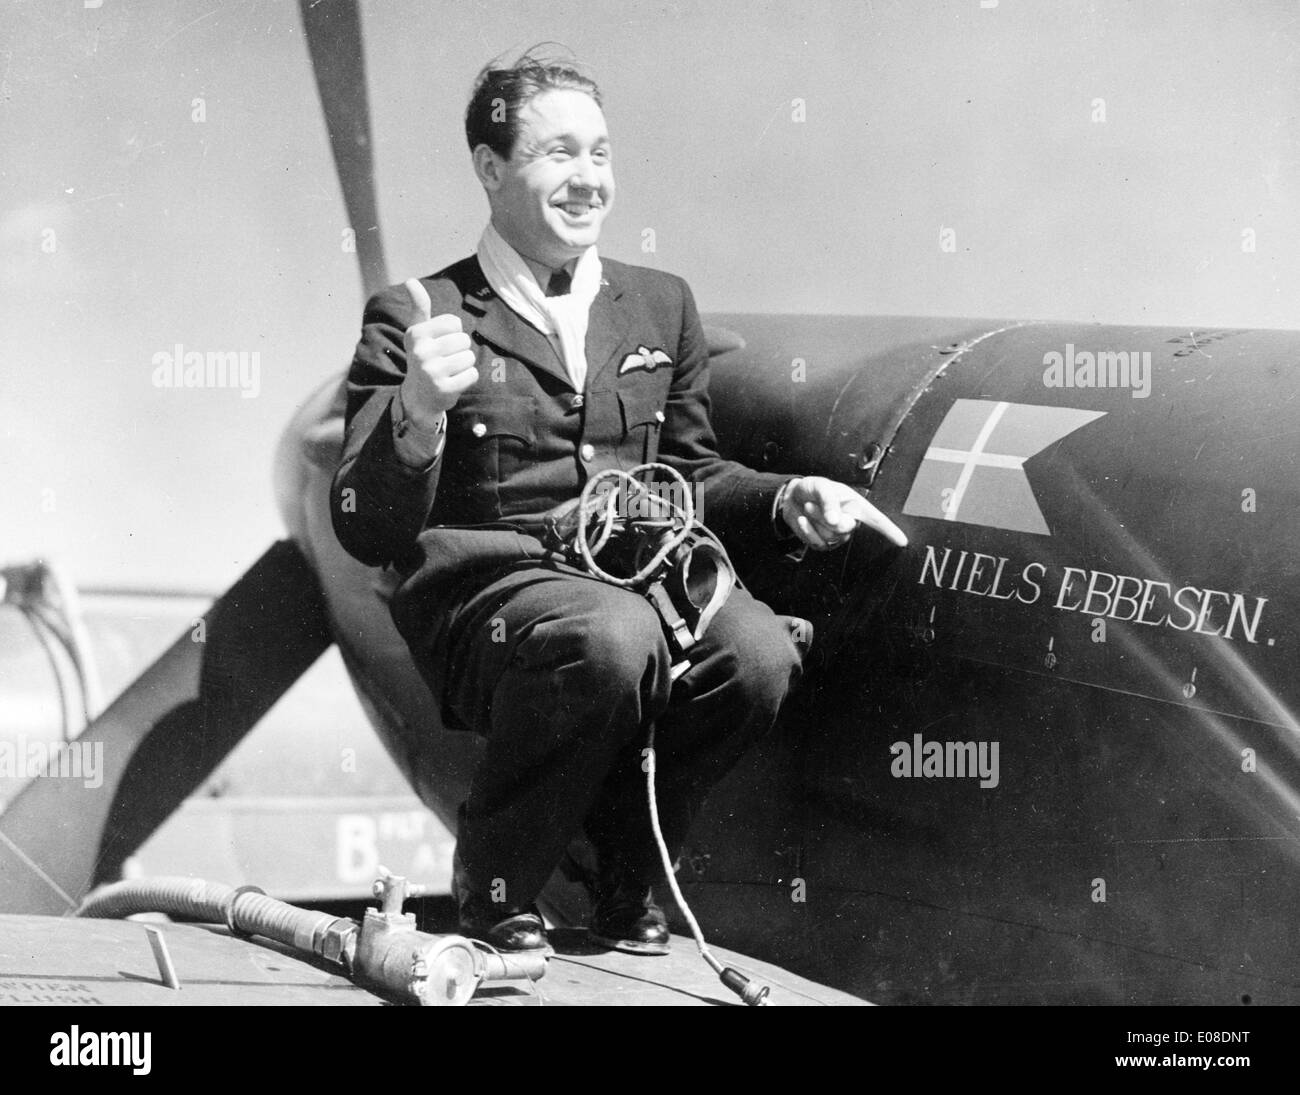 Danish pilot who is serving with the Royal Air Force in England, circa 1942 Stock Photo